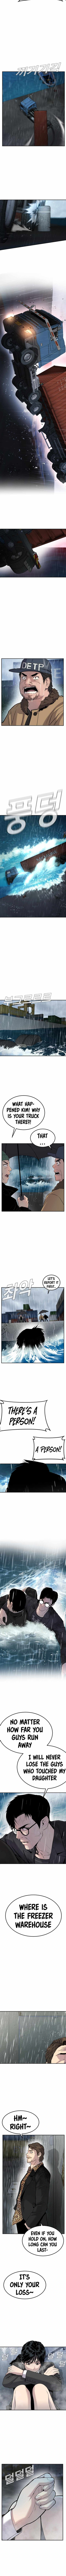 Manager Kim chapter 10 page 10